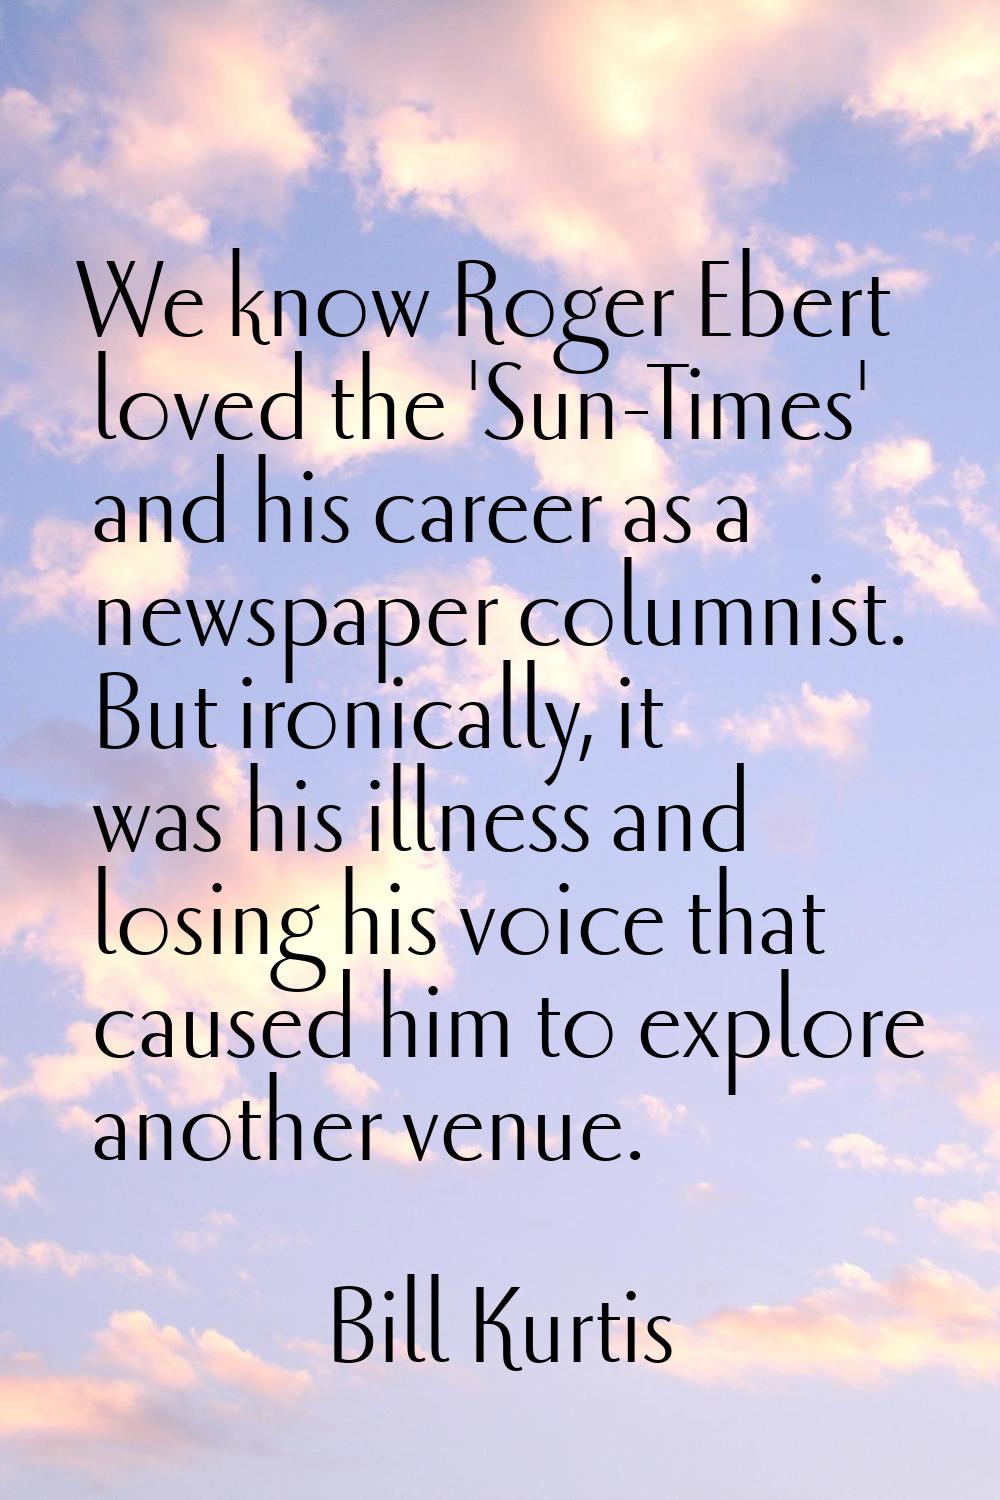 We know Roger Ebert loved the 'Sun-Times' and his career as a newspaper columnist. But ironically, 